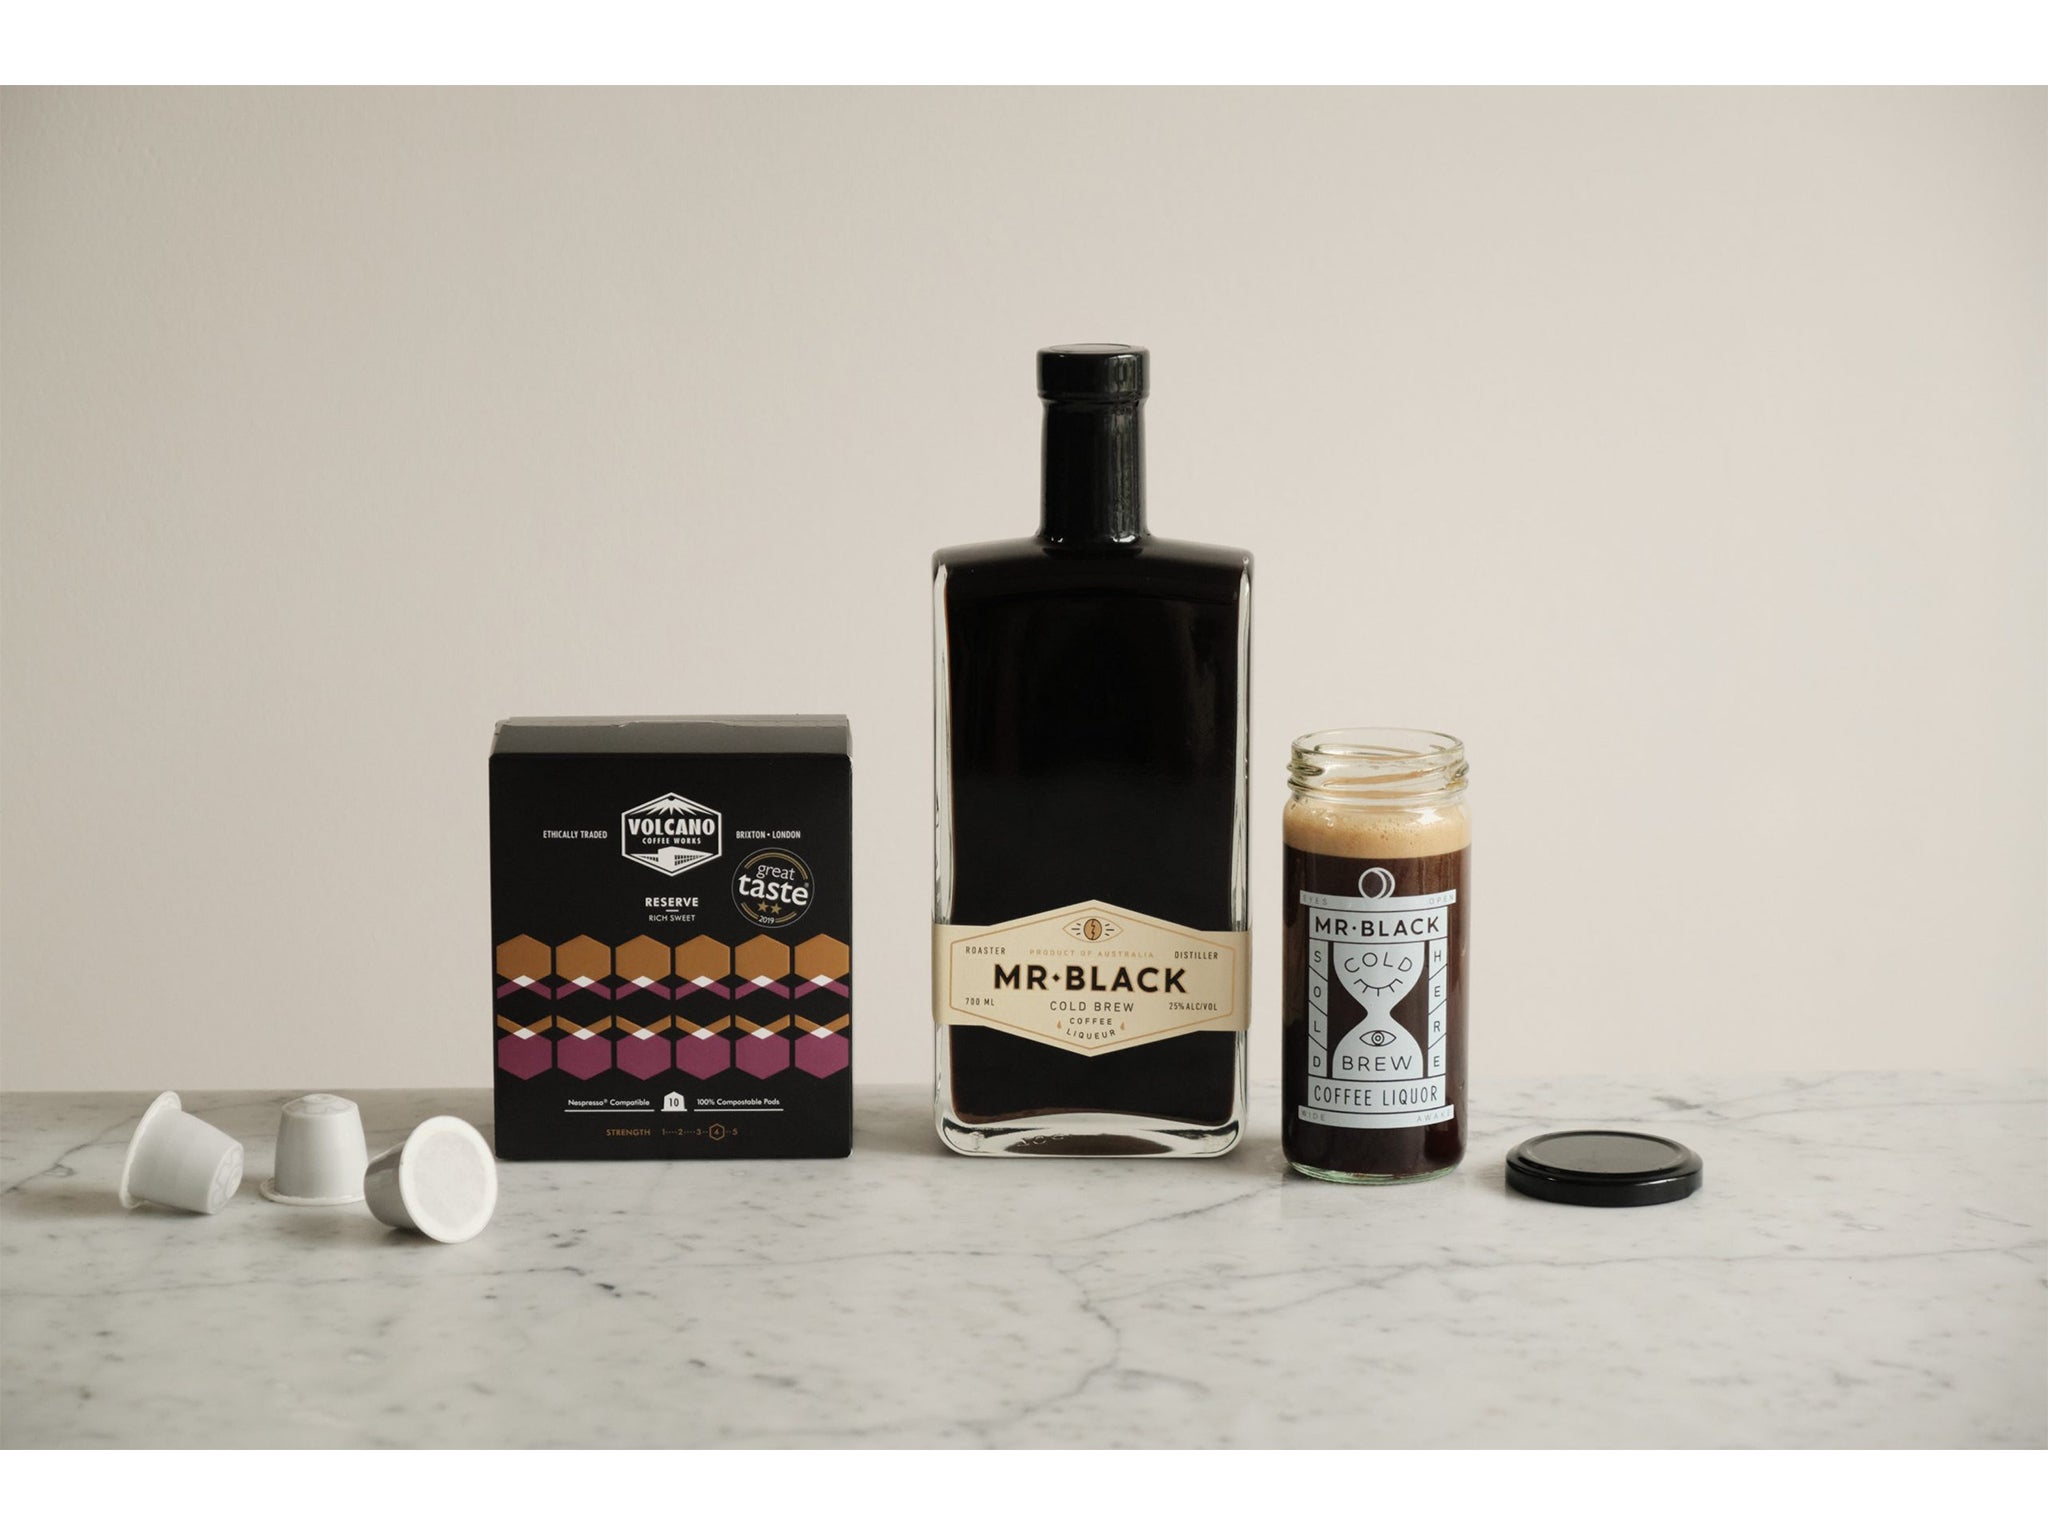 For espresso martini fans, pick up this cocktail making kit to make your own at home